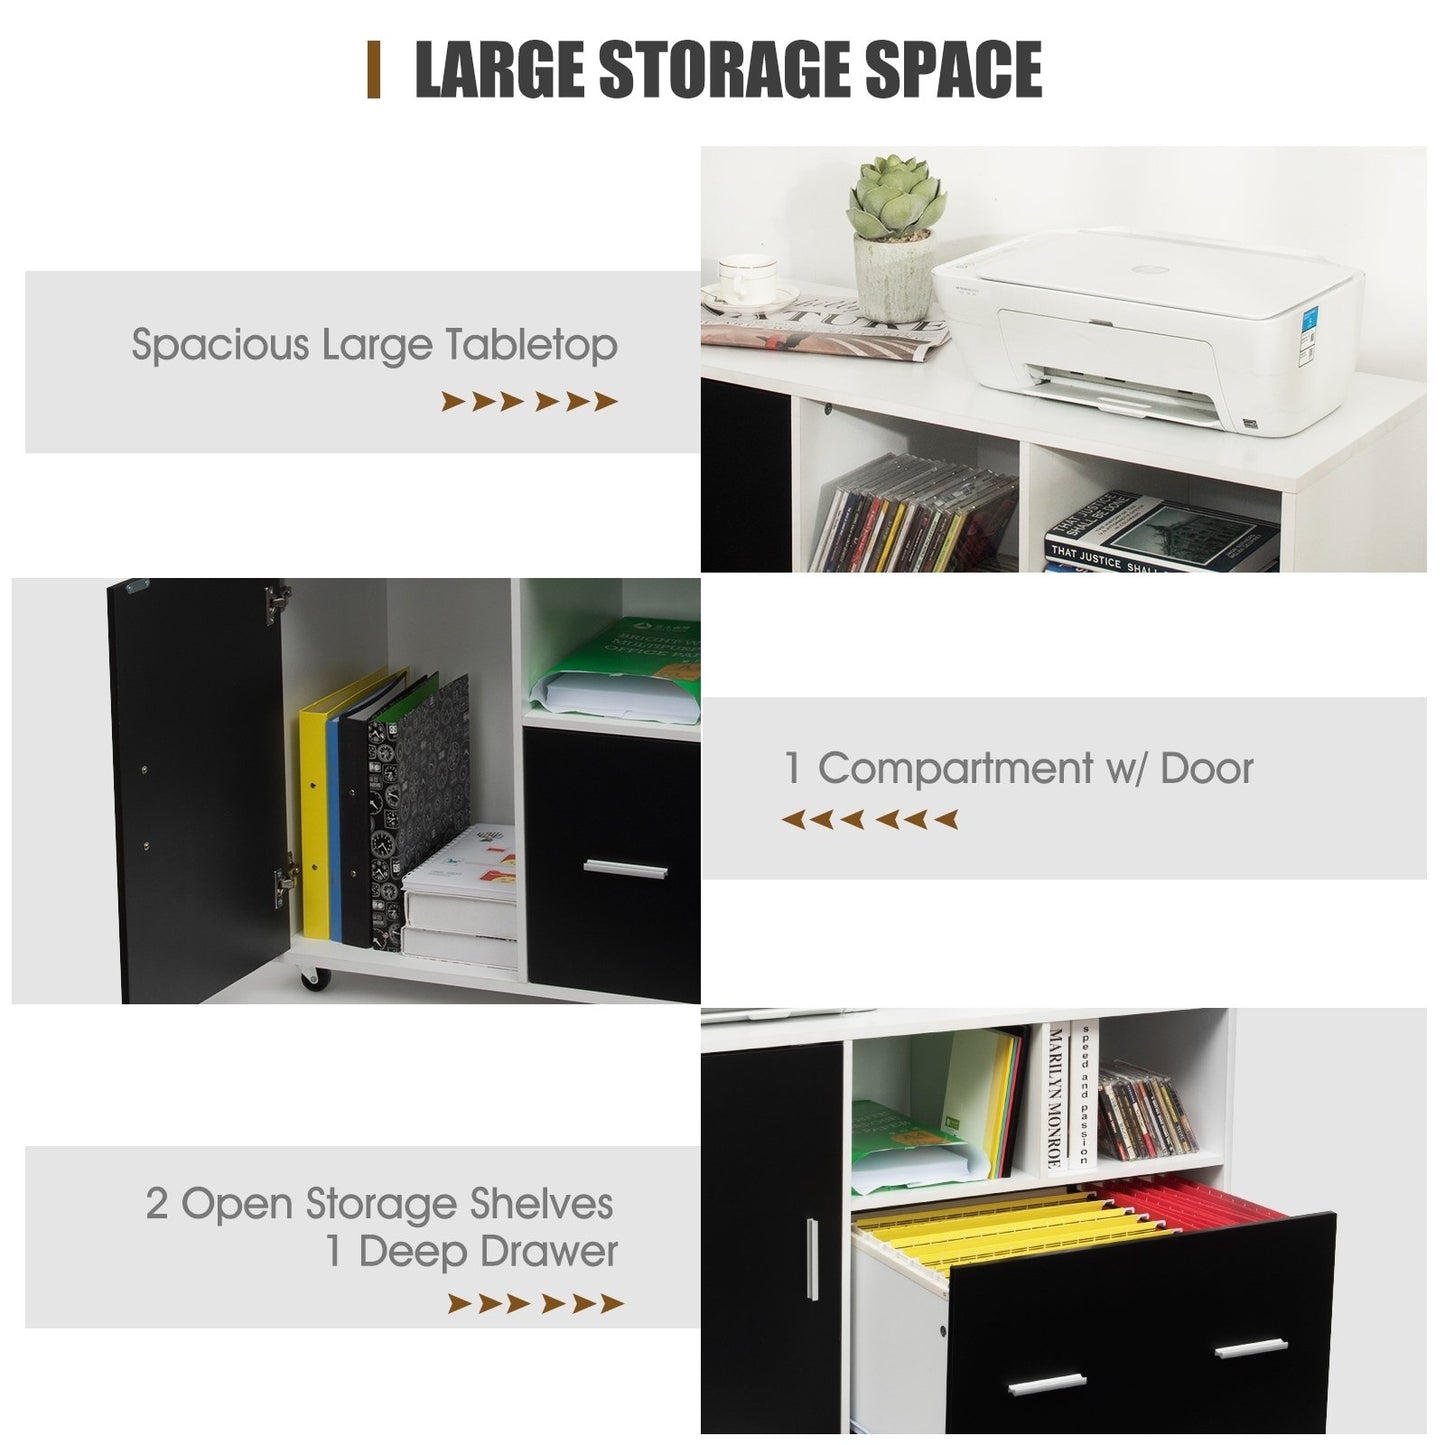 Lateral Mobile File Storage Cabinet, Black & White at Gallery Canada